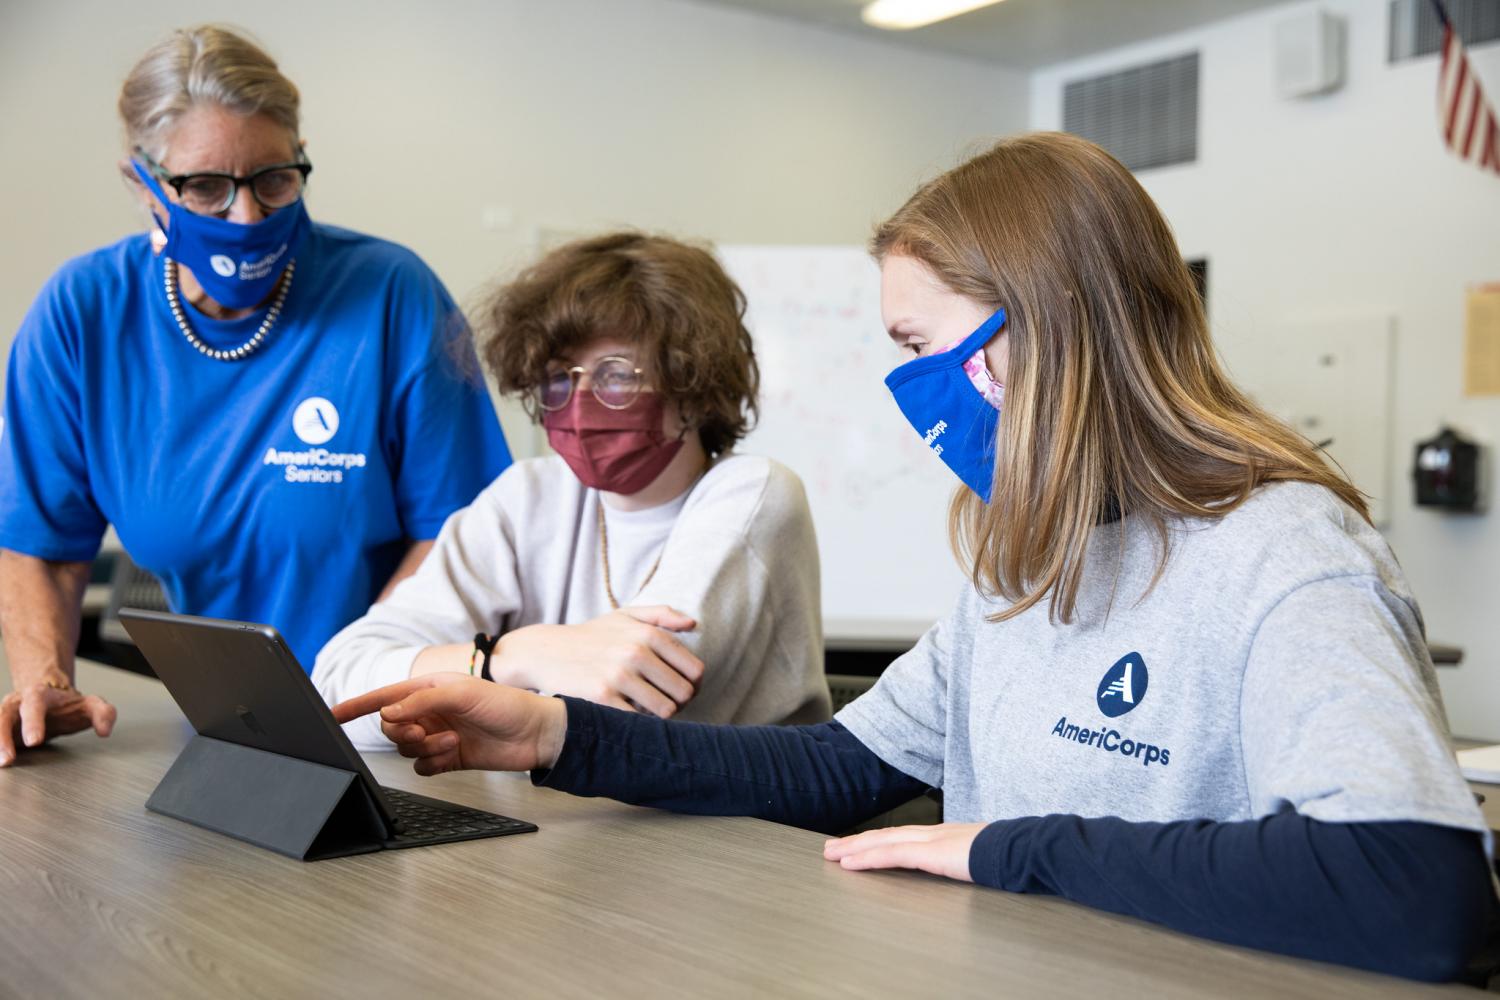 AmeriCorps members wearing masks work around a computer